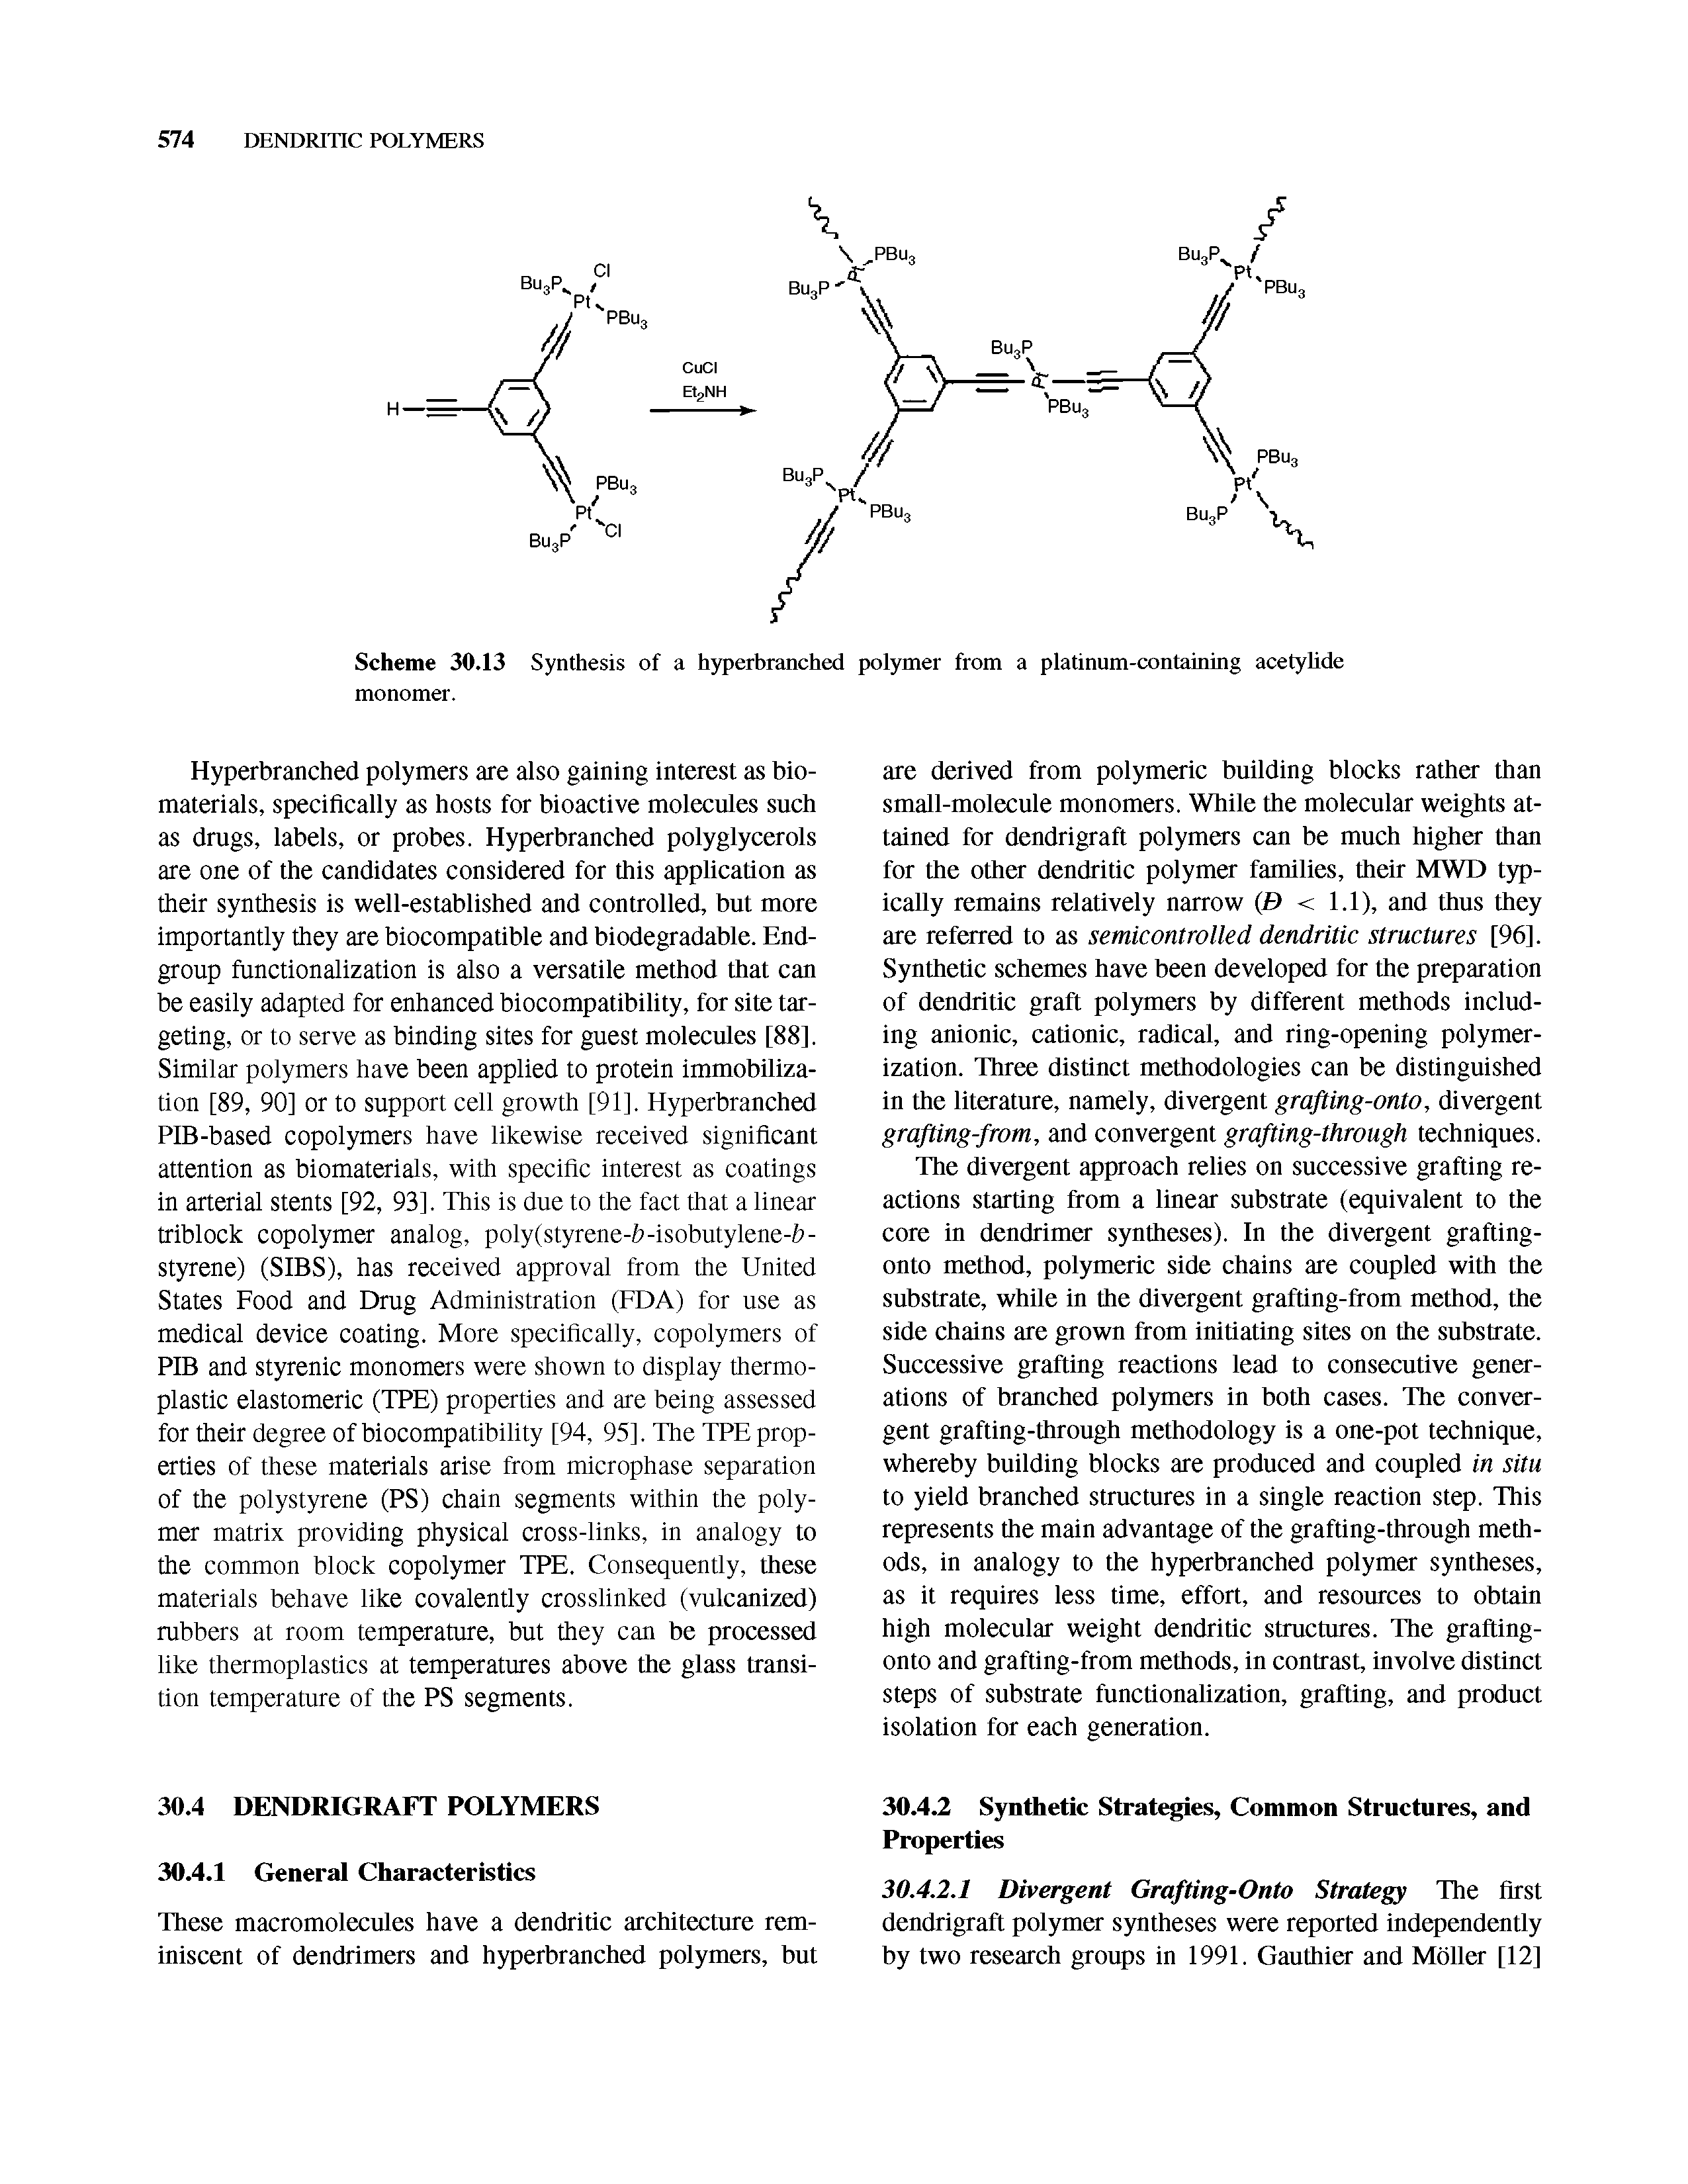 Scheme 30.13 Synthesis of a hyperbranched polymer from a platinum-containing acetyUde monomer.